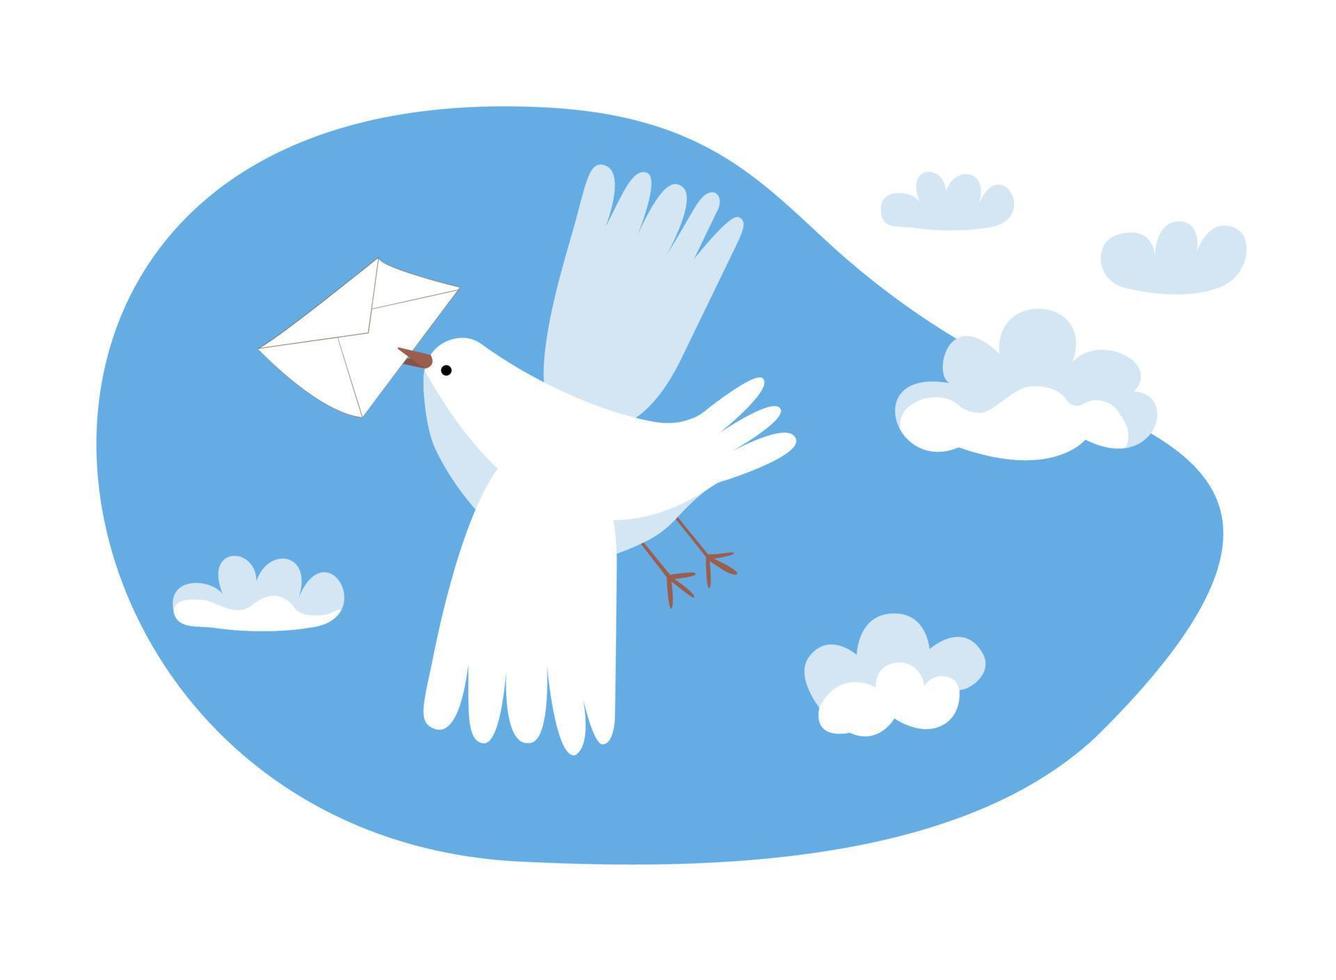 White pigeon postman flies in the sky with a mail. Dove delivers letters. Pigeon post. Vector hand drawn illustration.